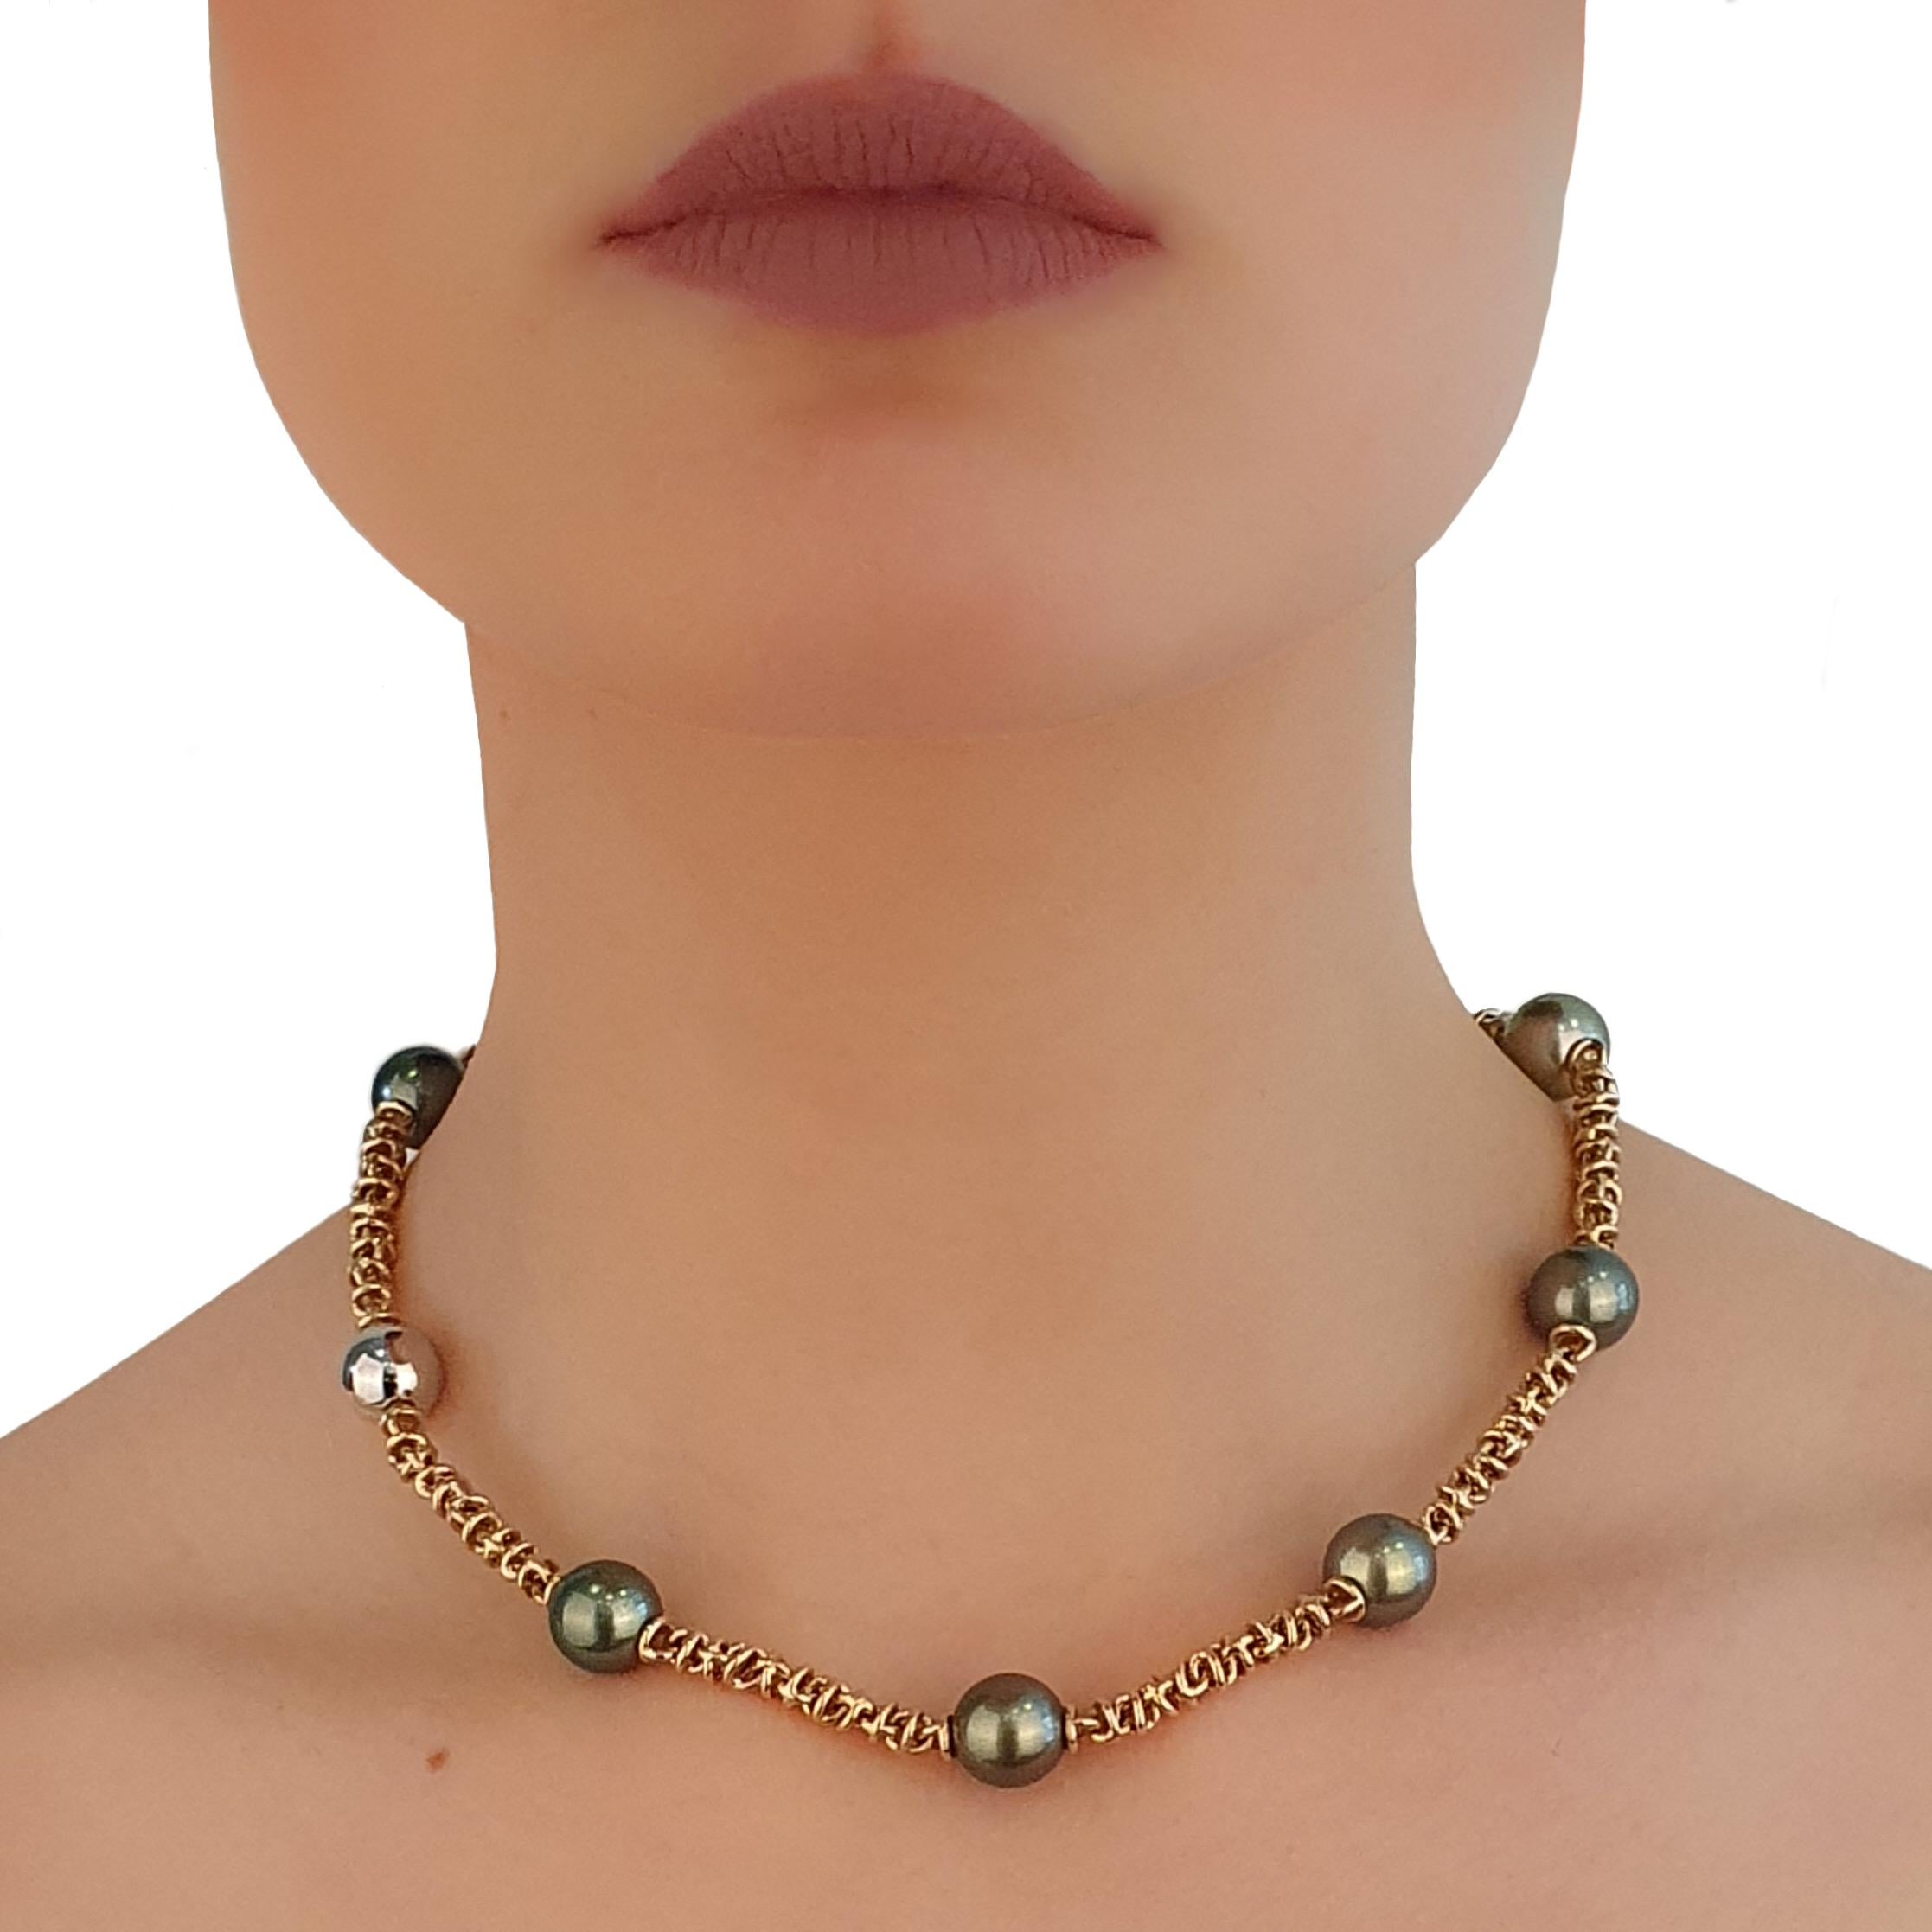 Cober Jewellery with 18 Carat Yellow Gold Tahiti Pearls Necklace

18K Yellow Gold Necklace with 9 Tahiti Pearls.

About Cober Jewellery:
Cober designs exclusive wedding rings, jewels and watches, all of them made by hand.
“The most distinctive